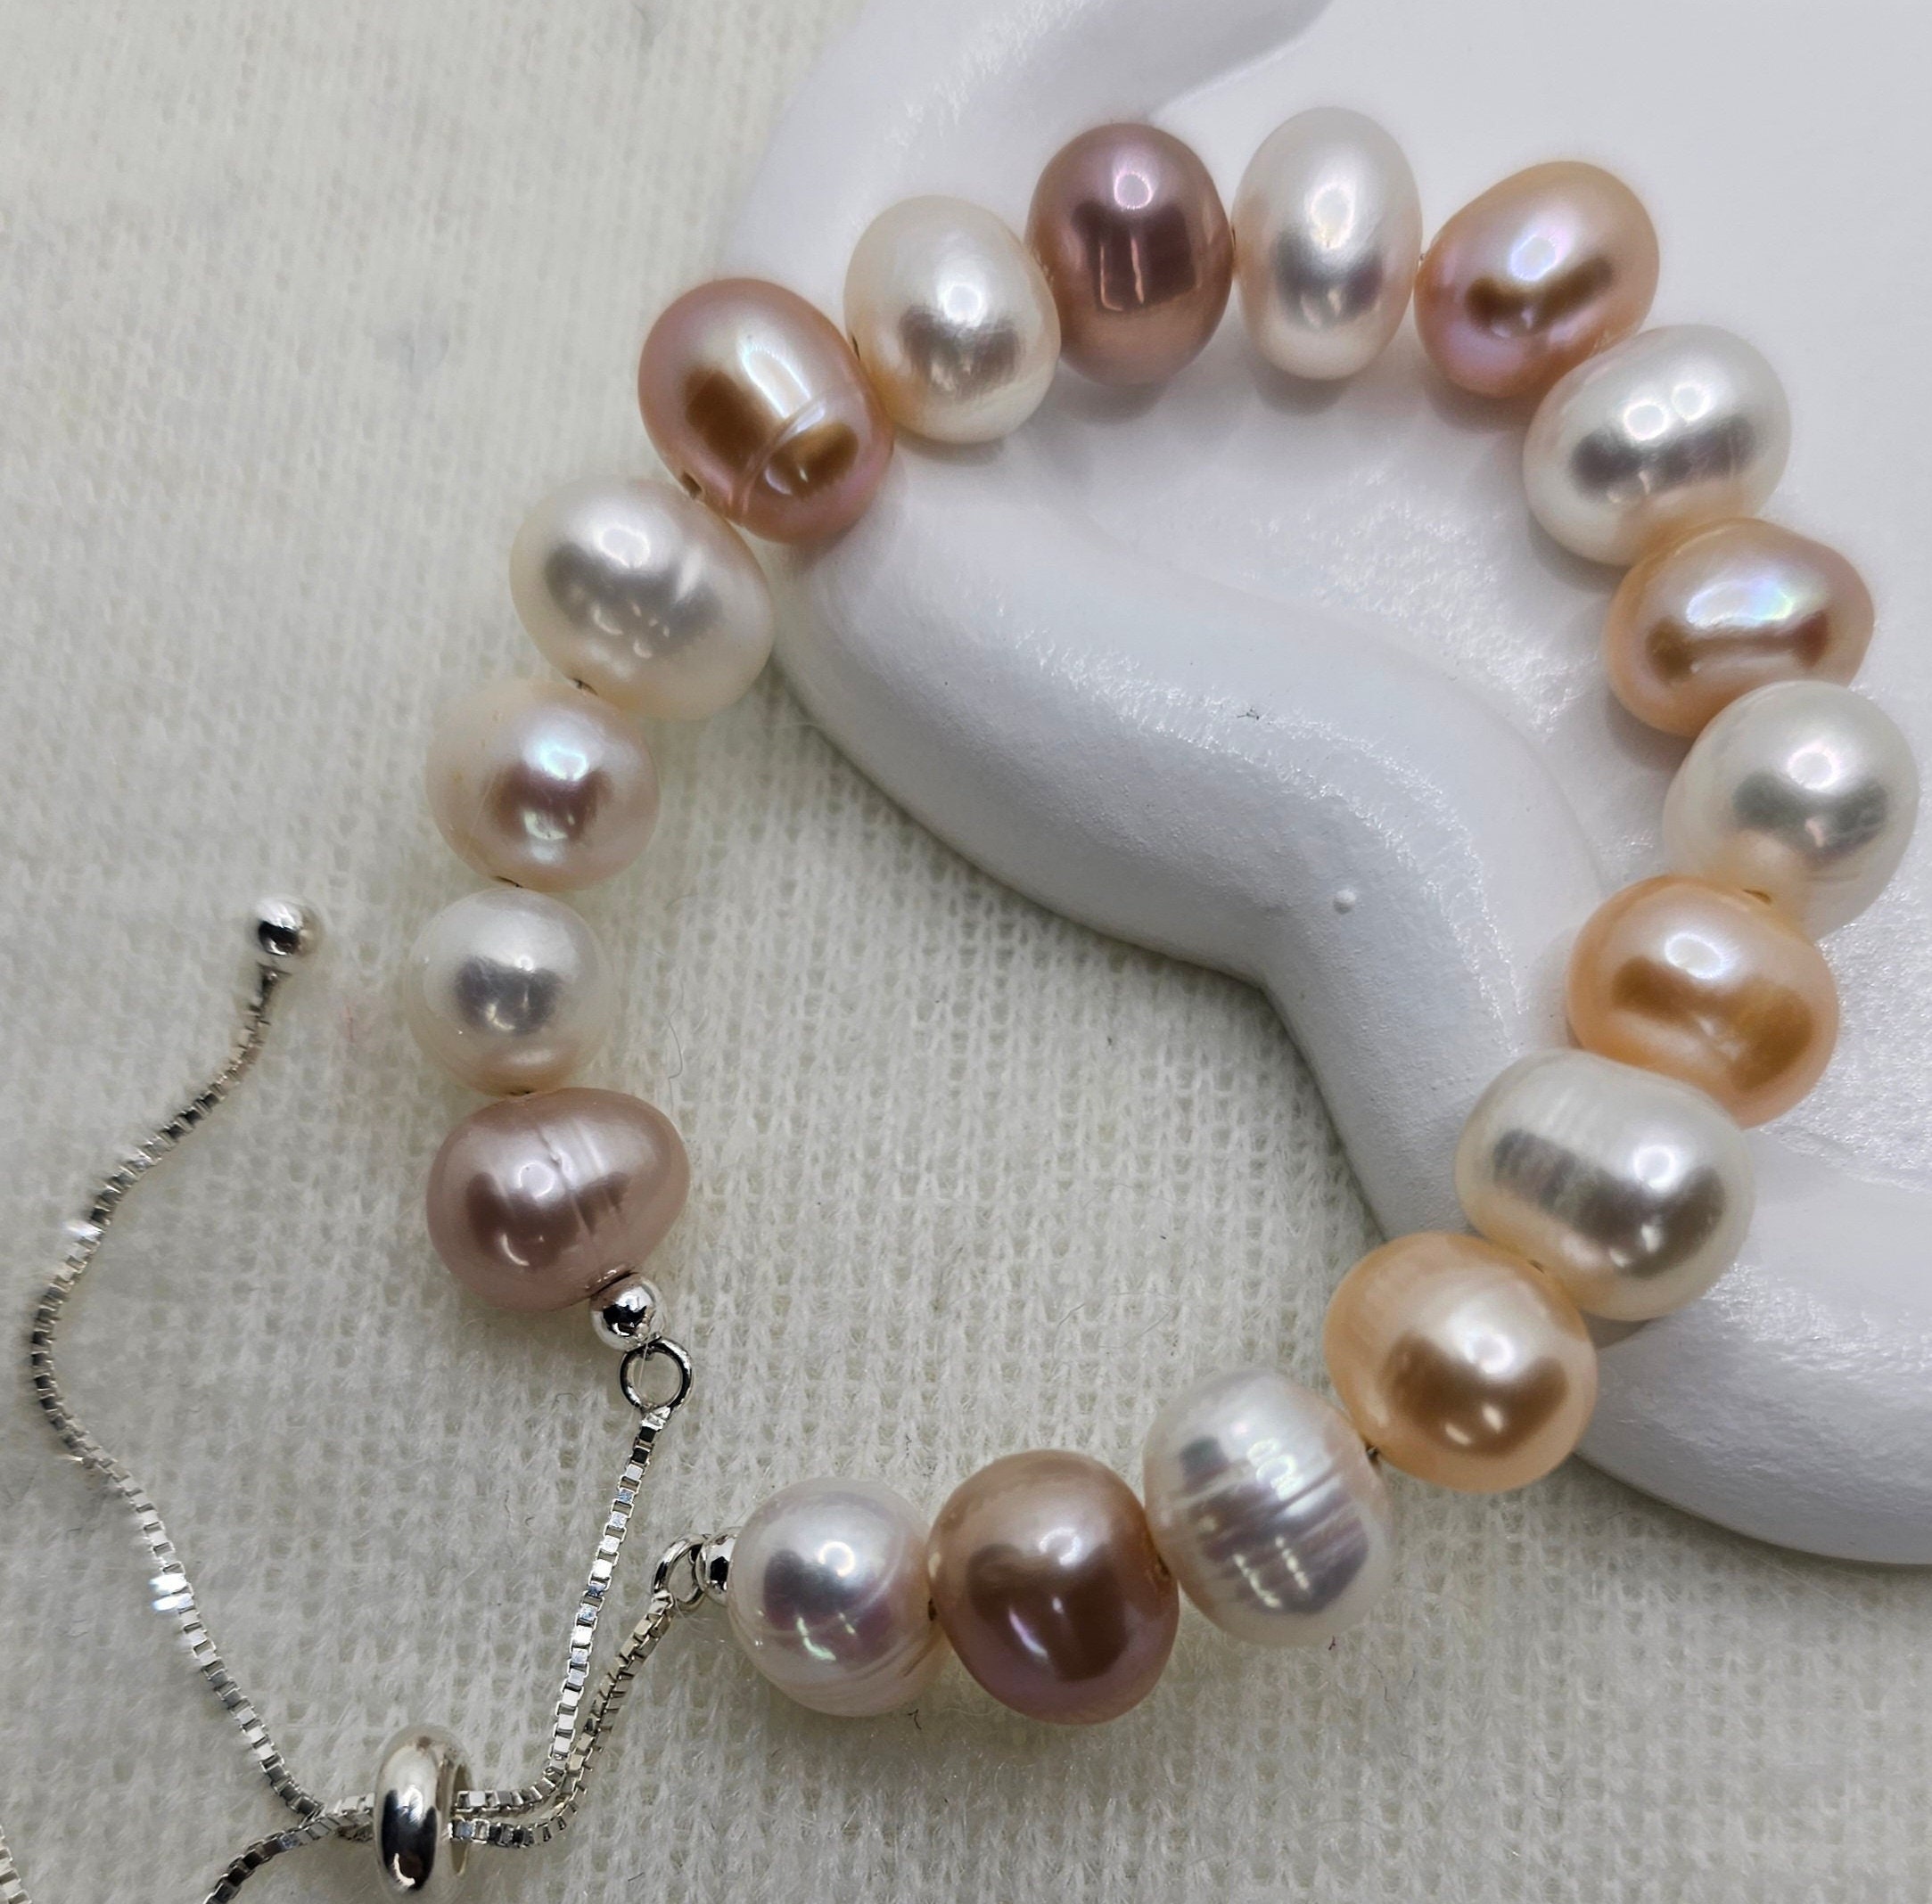 Freshwater Pearl Bead Charms - Pastel Pearl Beads in Mint Peach Cream